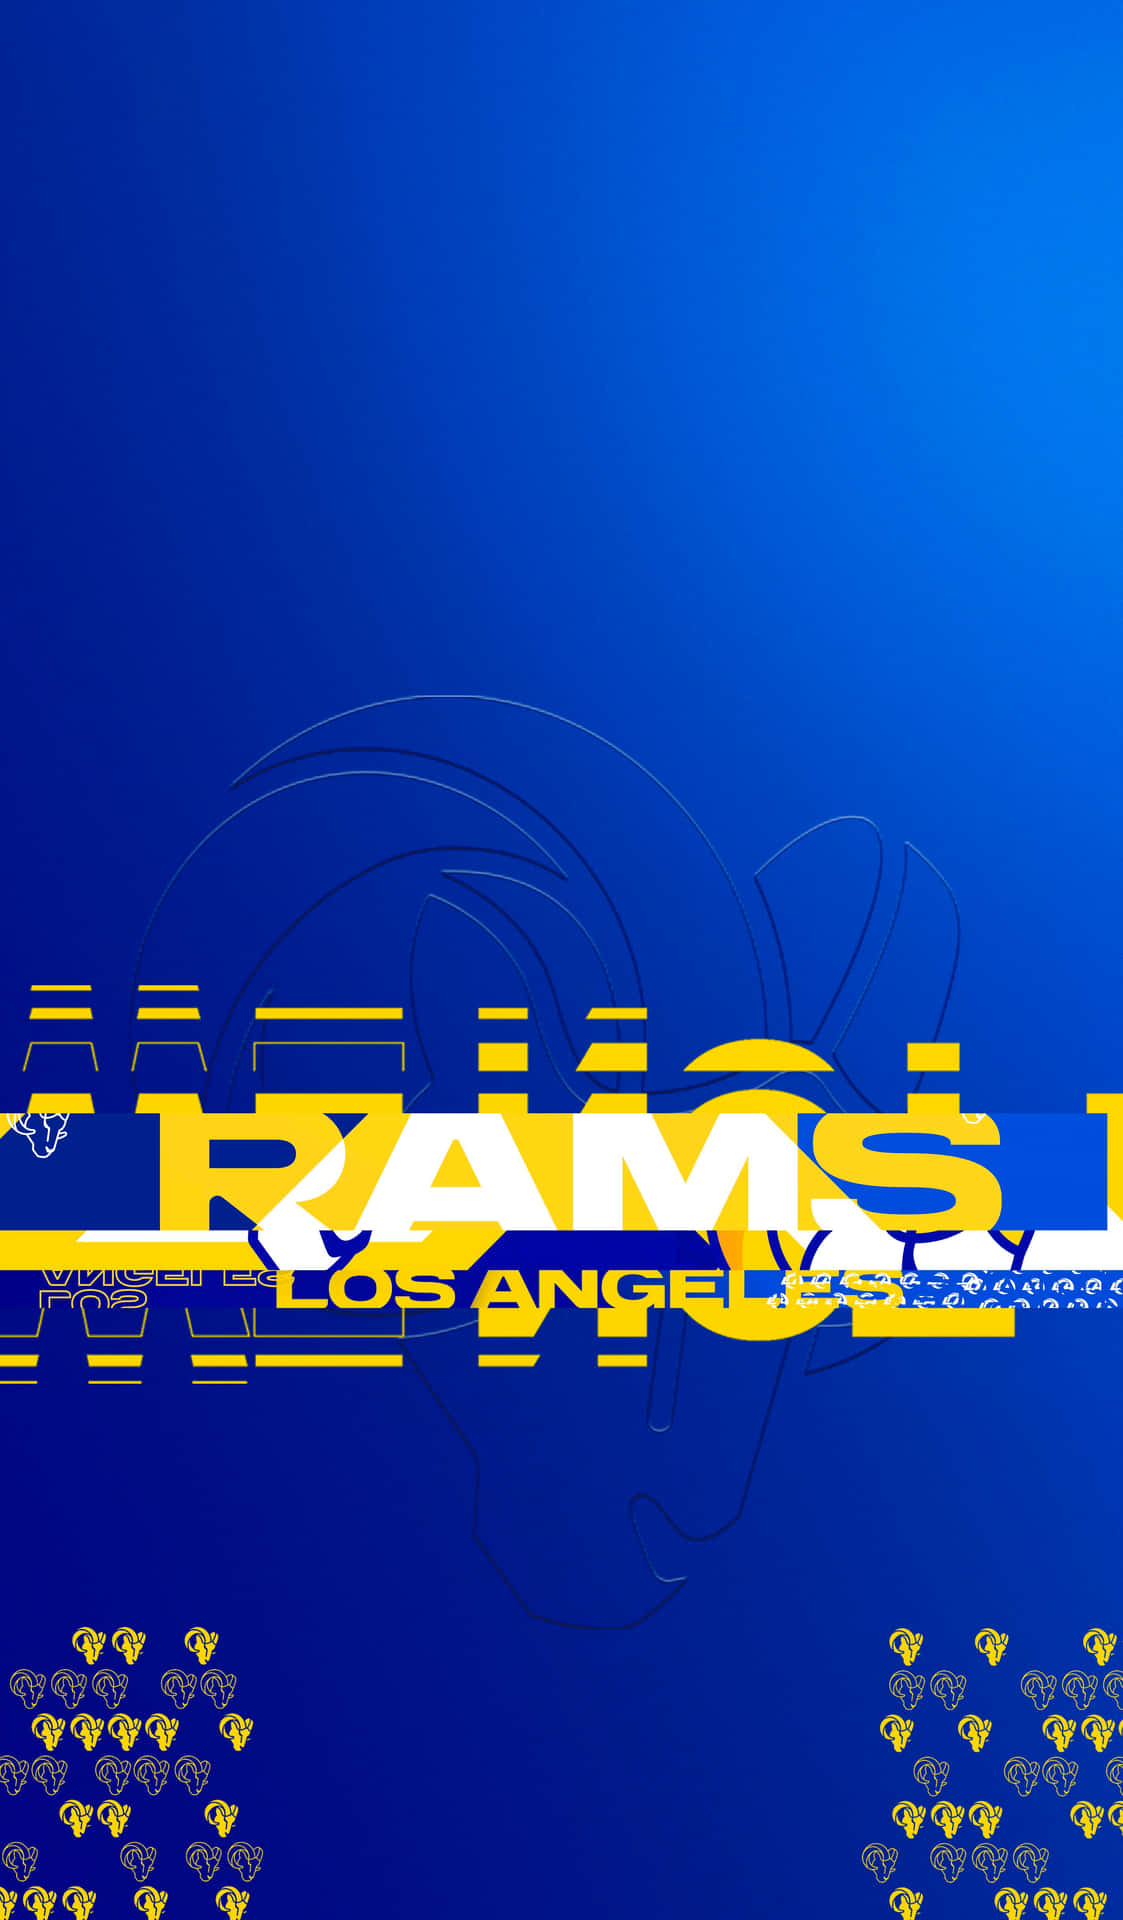 Show off Rams Team Pride on Your iPhone Wallpaper